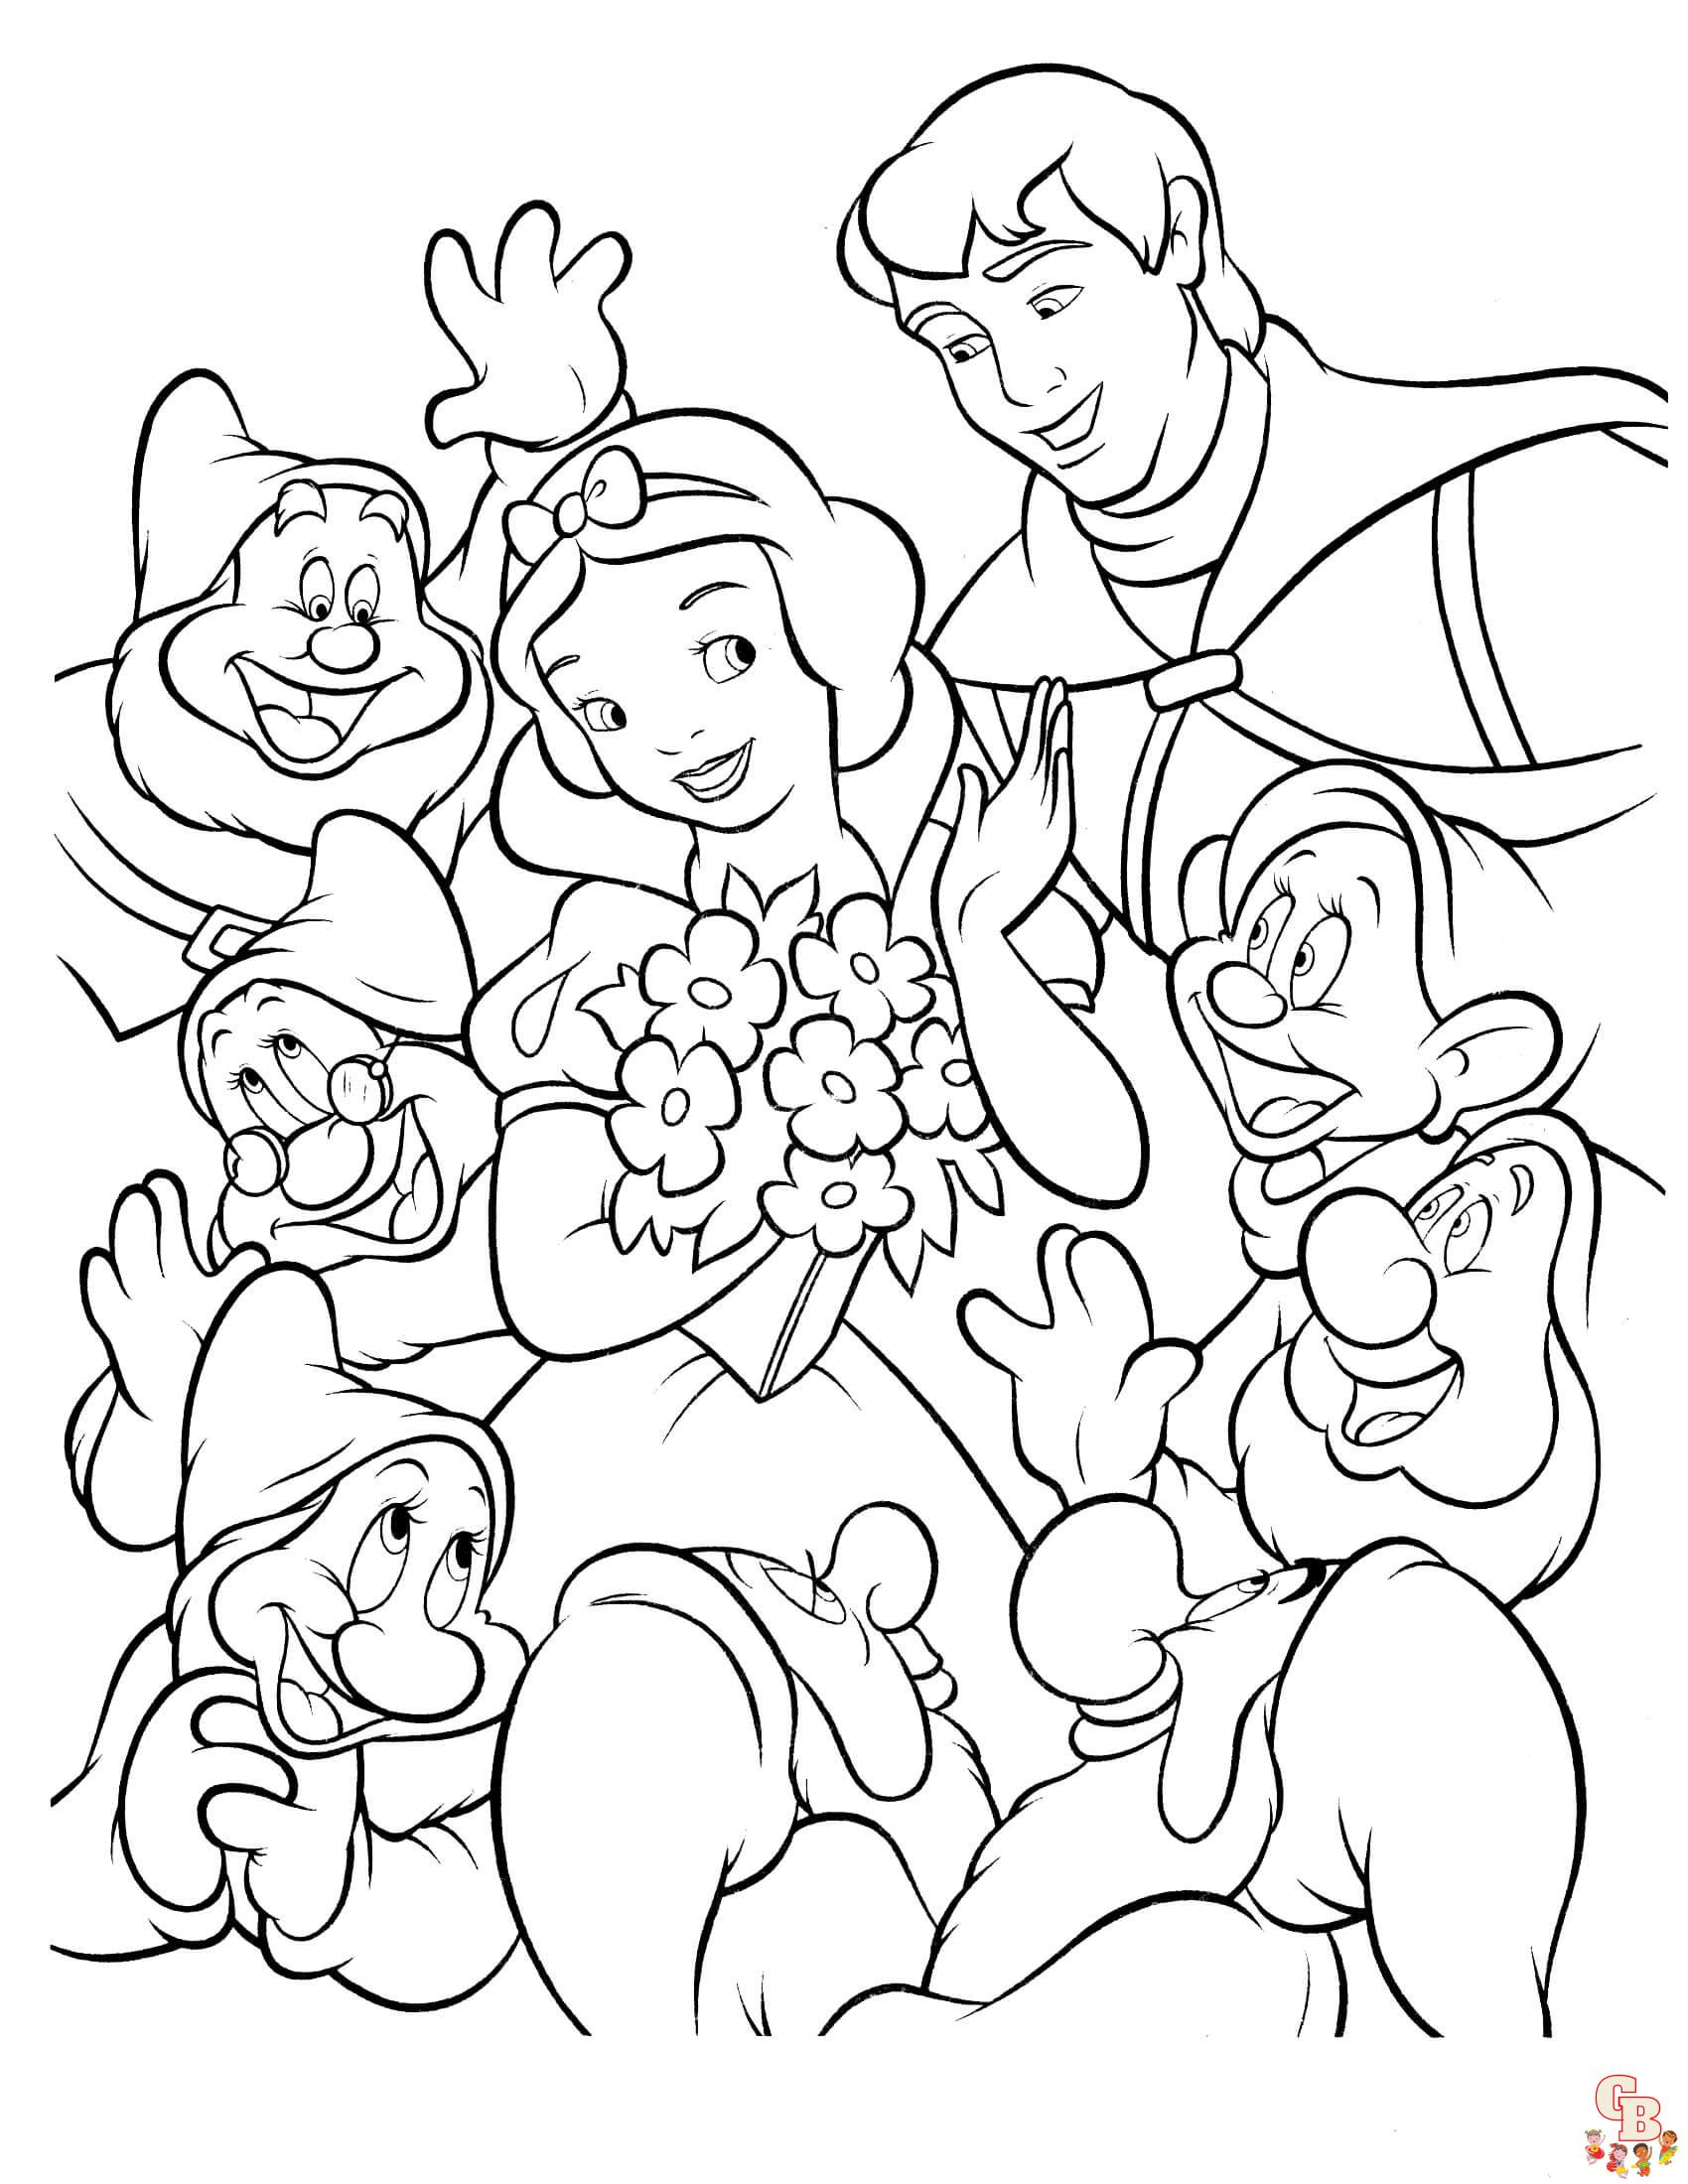 Seven Dwarfs In Snow White coloring pages free 1